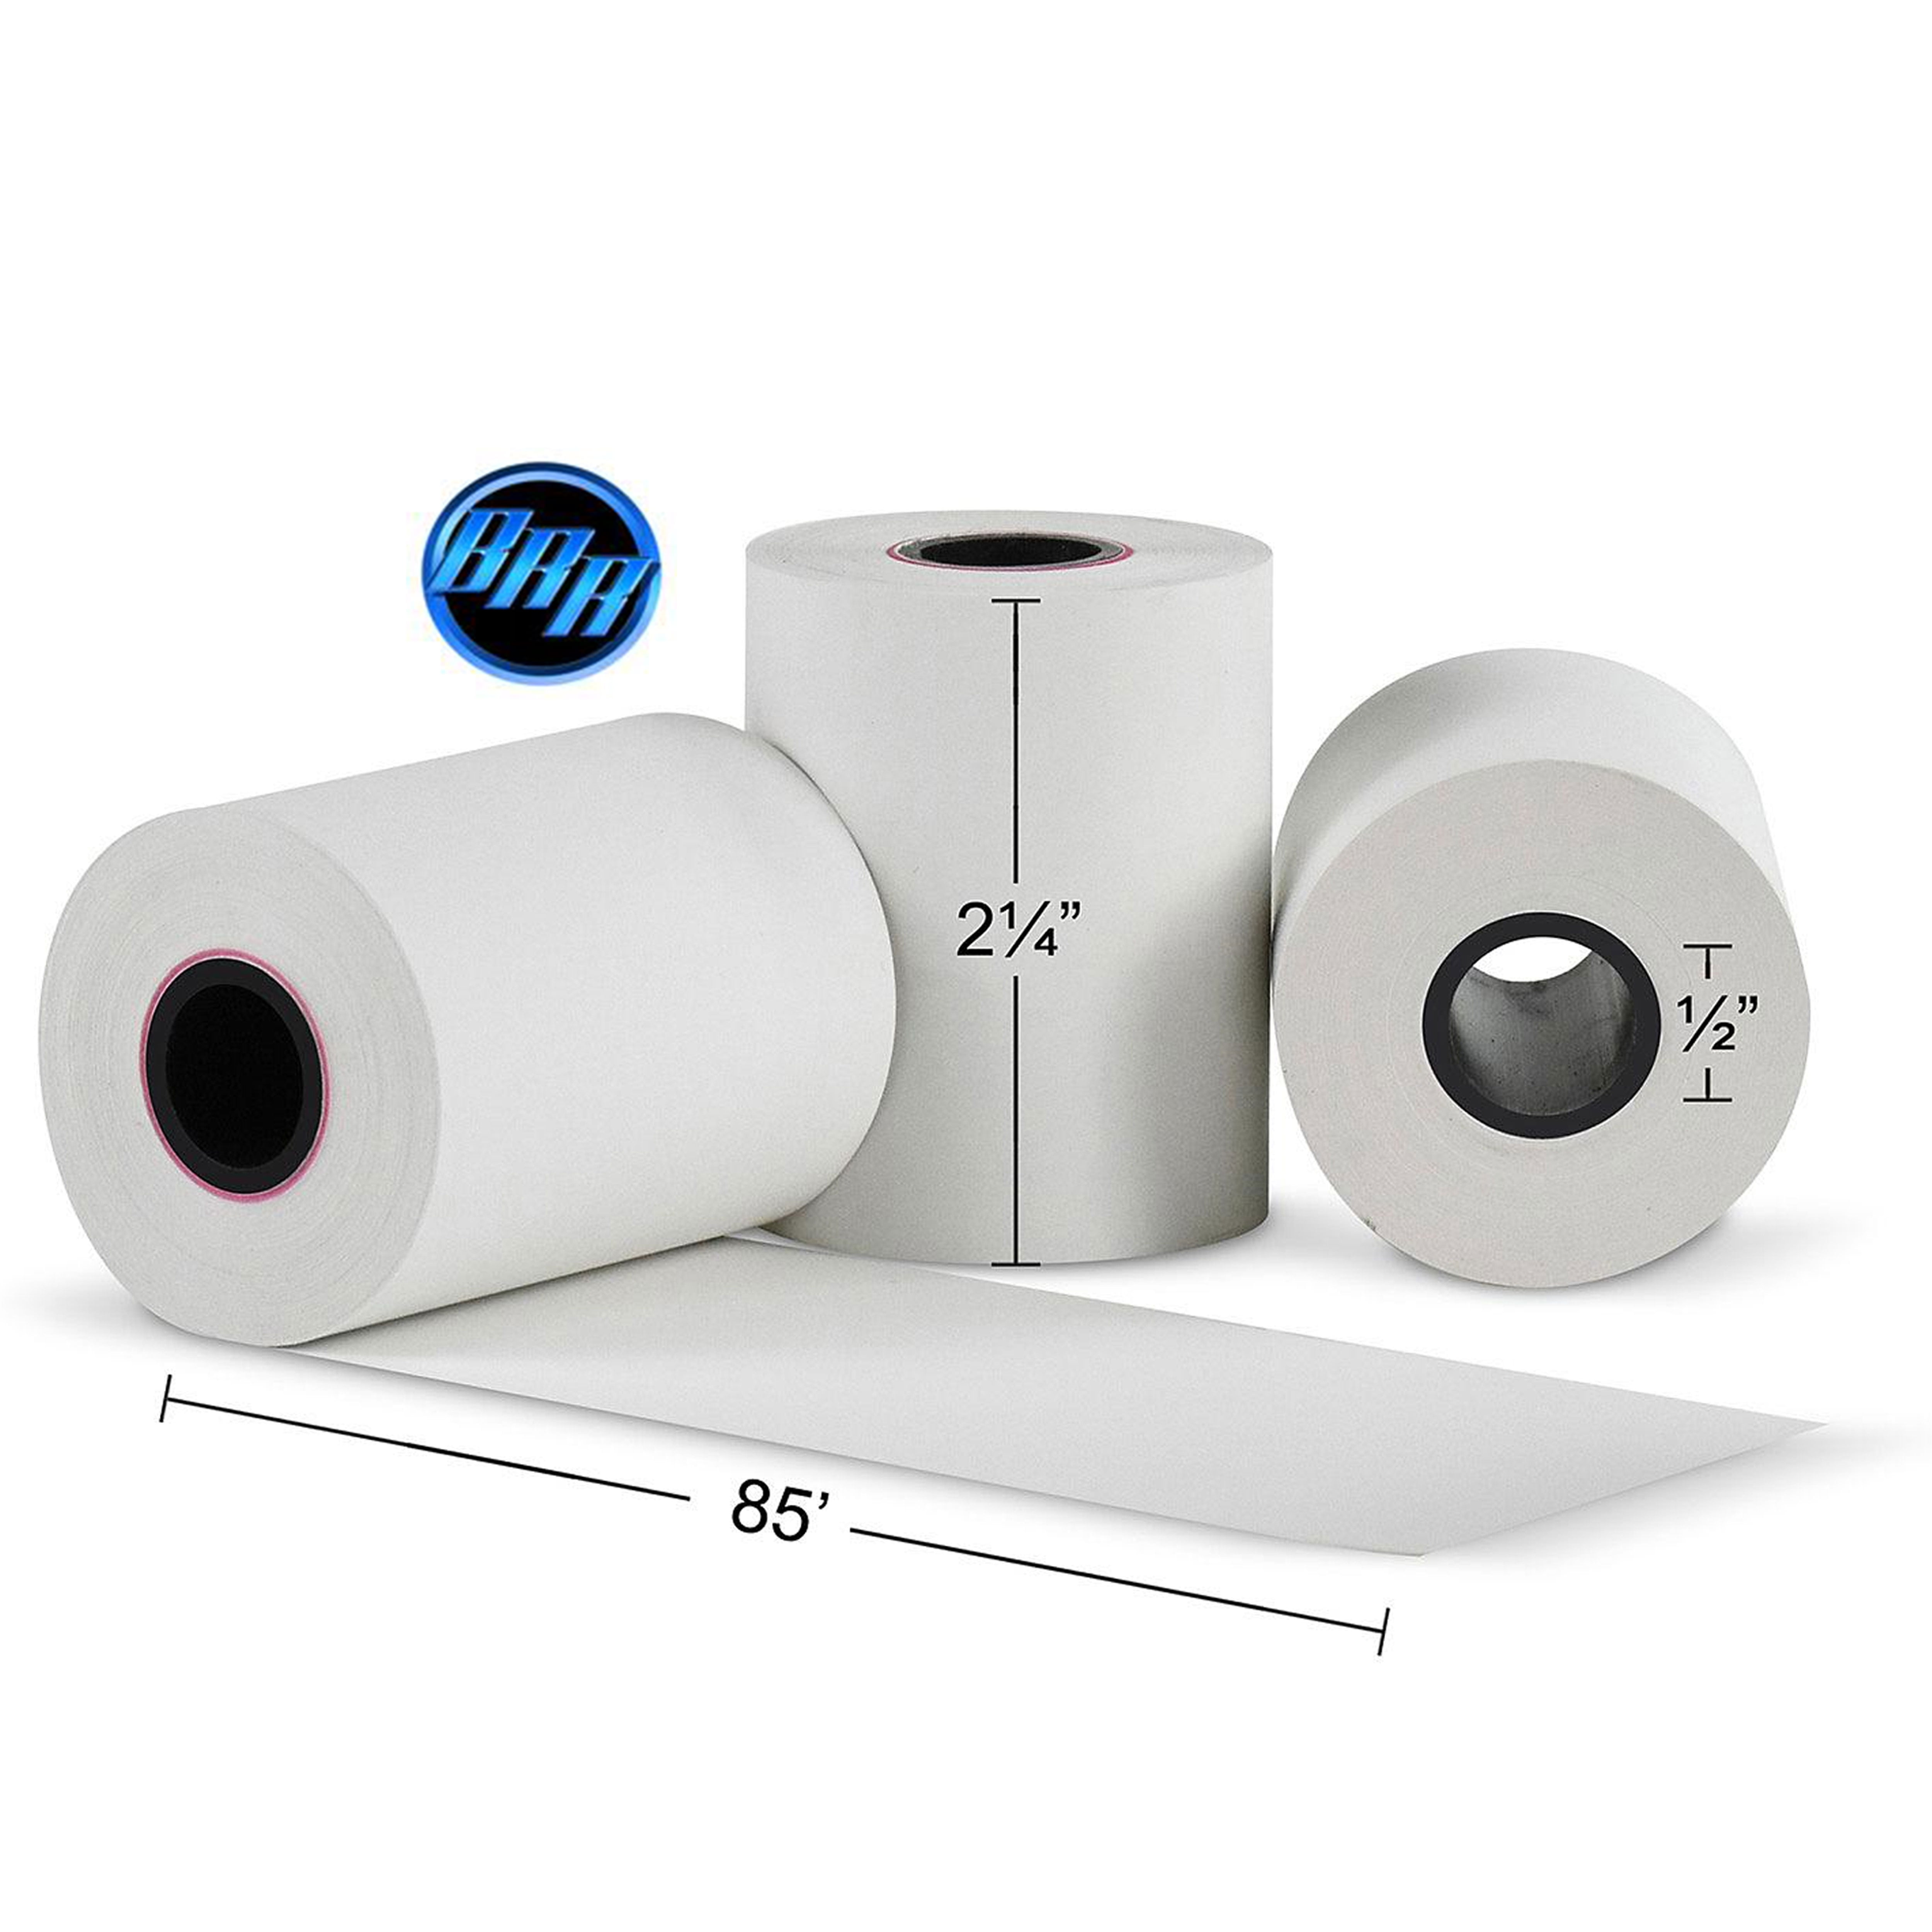 2 1//4 Thermal Paper 50 Rolls for Credit Card Machine POS Register Receipt Paper Roll 2 1//4 x 85